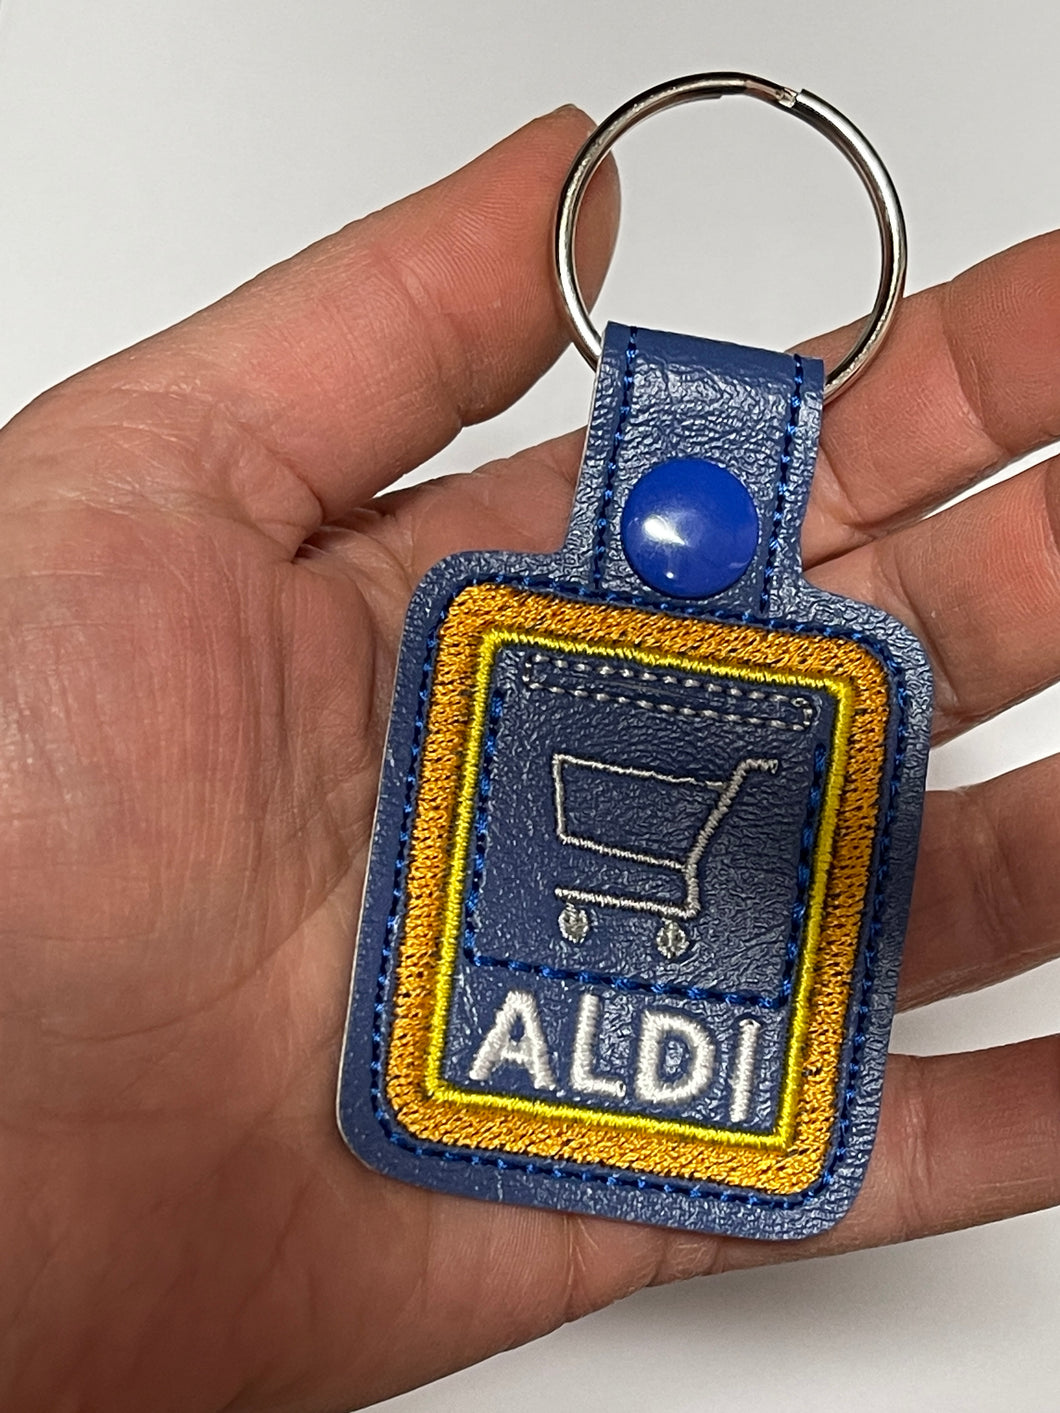 Aldi quarter holder Shopping cart keychain, Embroidered with Grocery cart outline